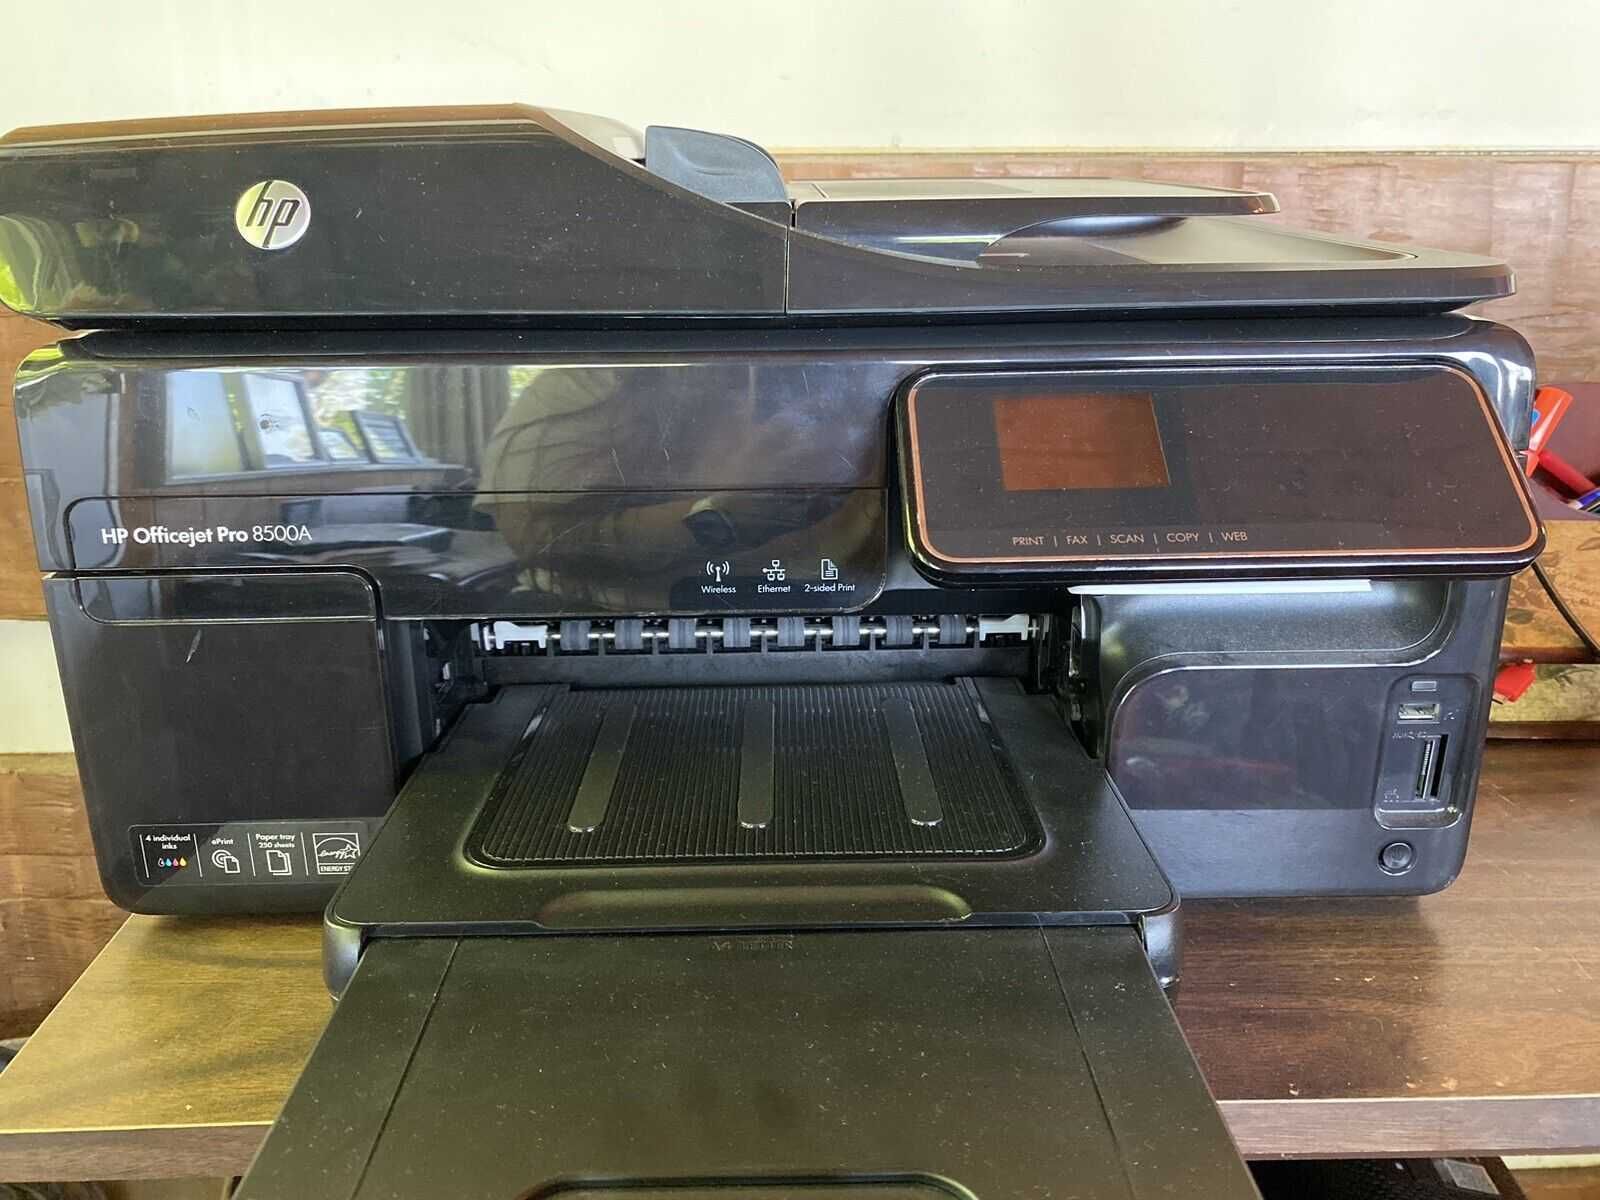 Imprimanta color multifunctionala HP Officejet Pro 8500A e-All-in-One